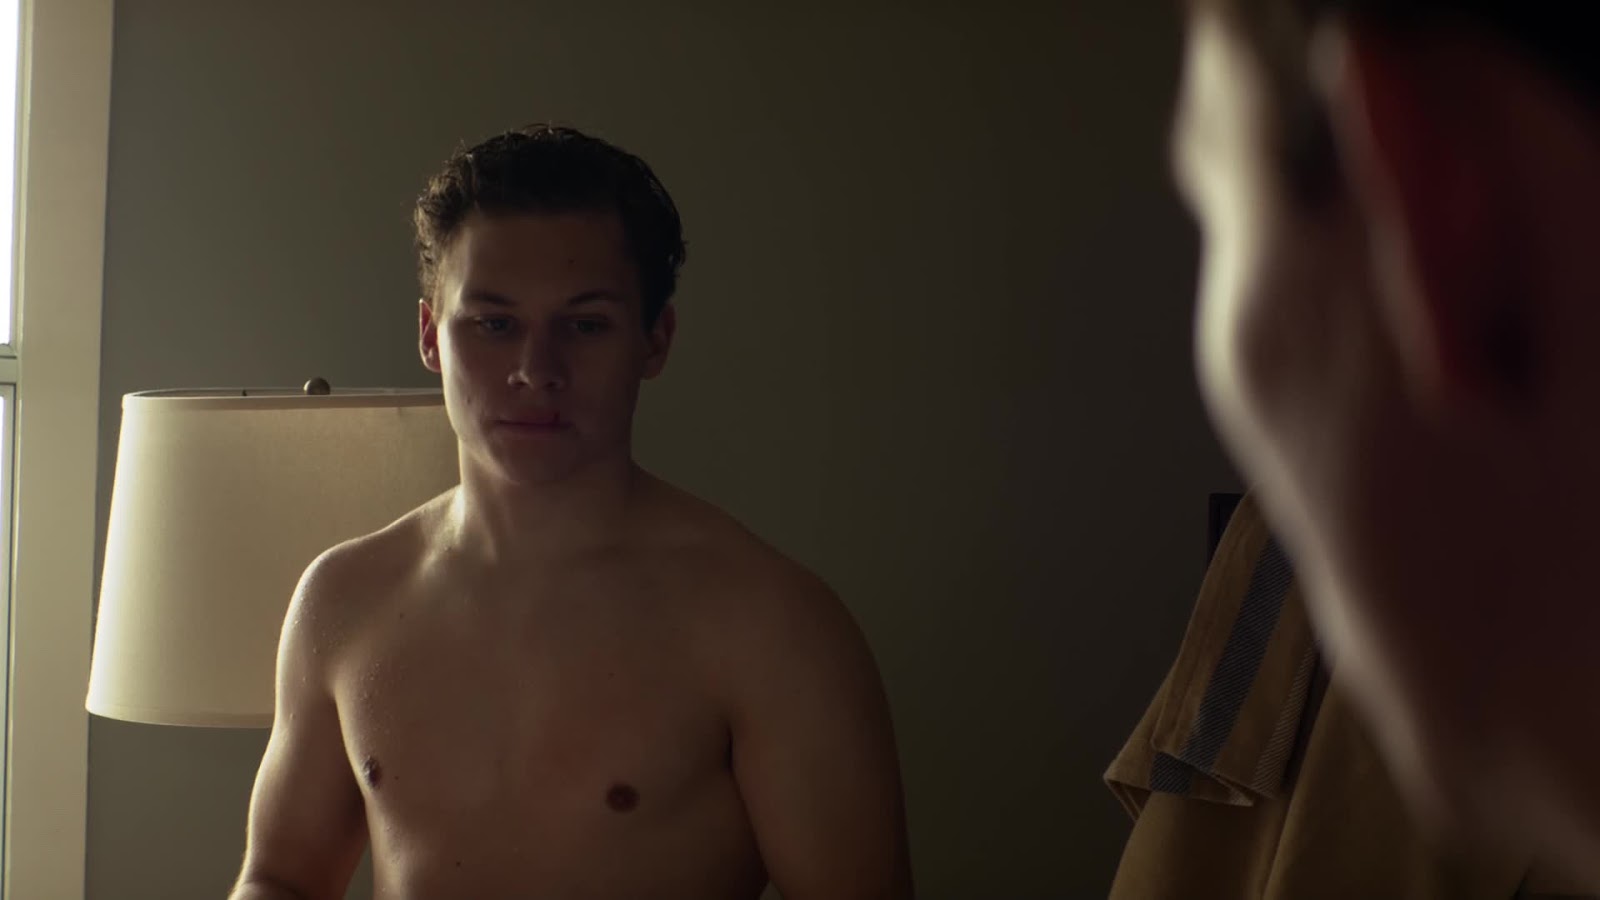 Finn Cole - Shirtless, Barefoot & Naked in "Animal Kingdom" .